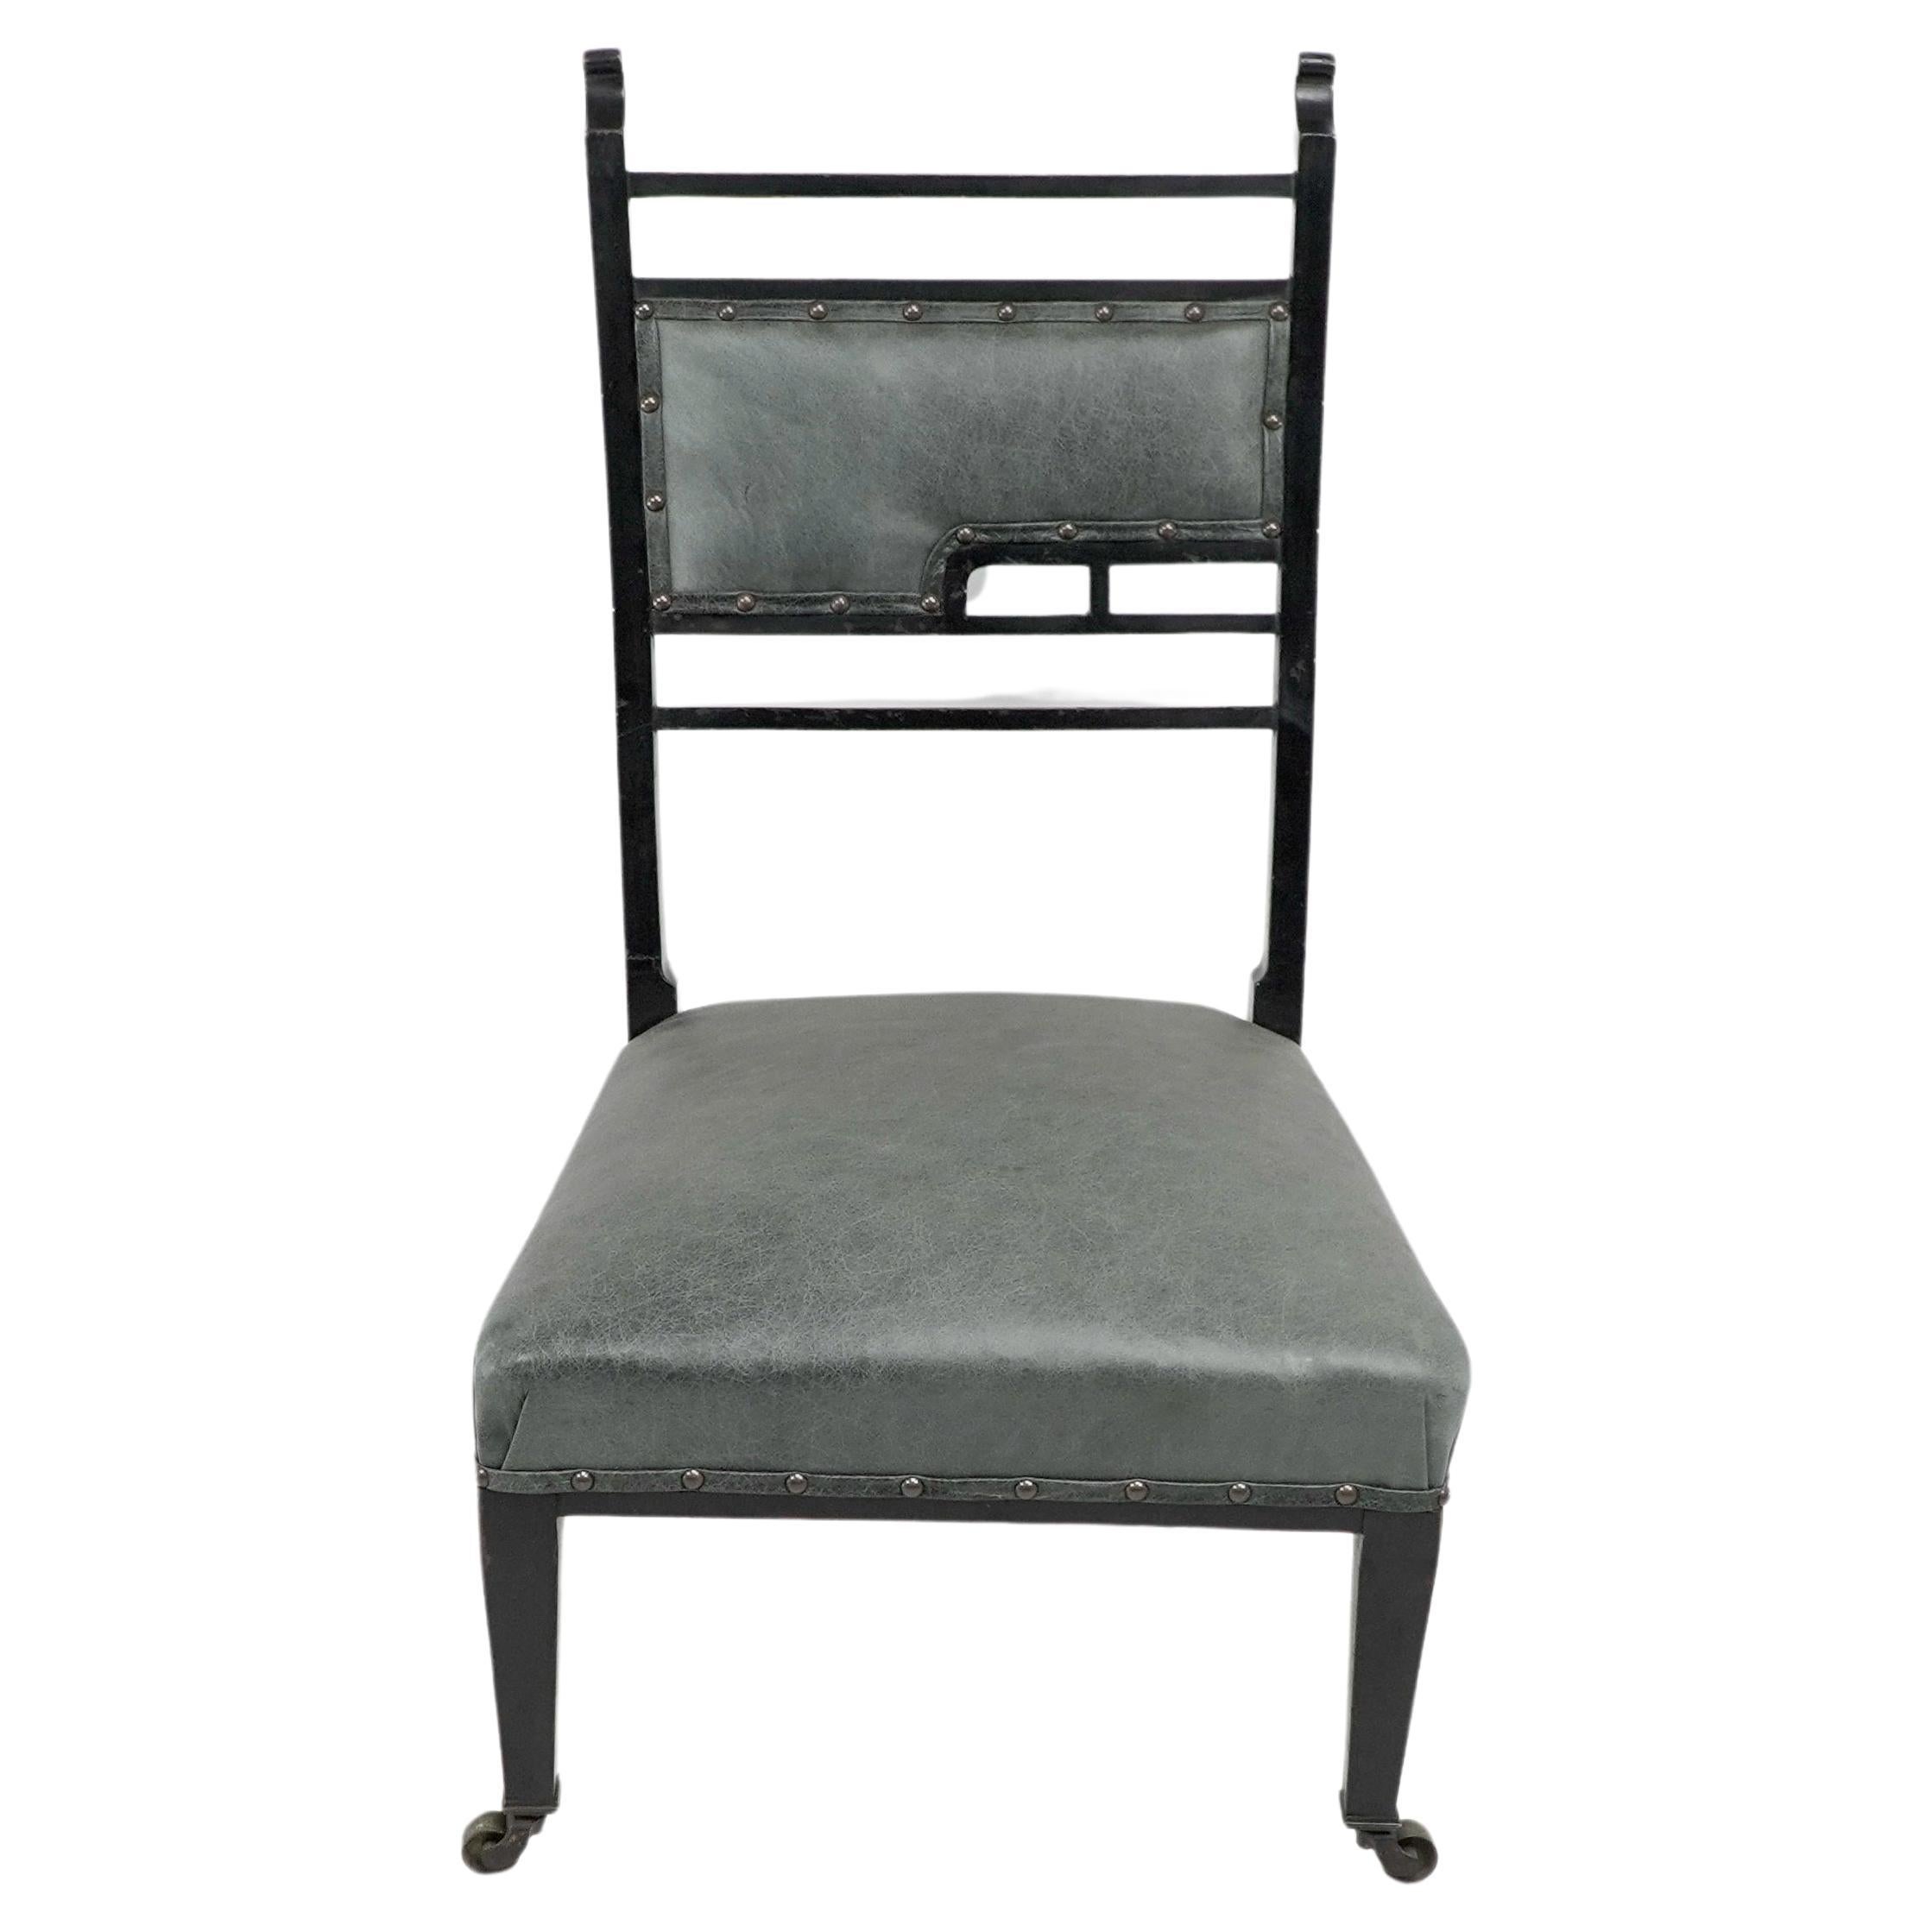 An Anglo-Japanese ebonized side or nursing chair with curled finials and subtle fret works to the back. Professionally reupholstered in high quality green hide.
